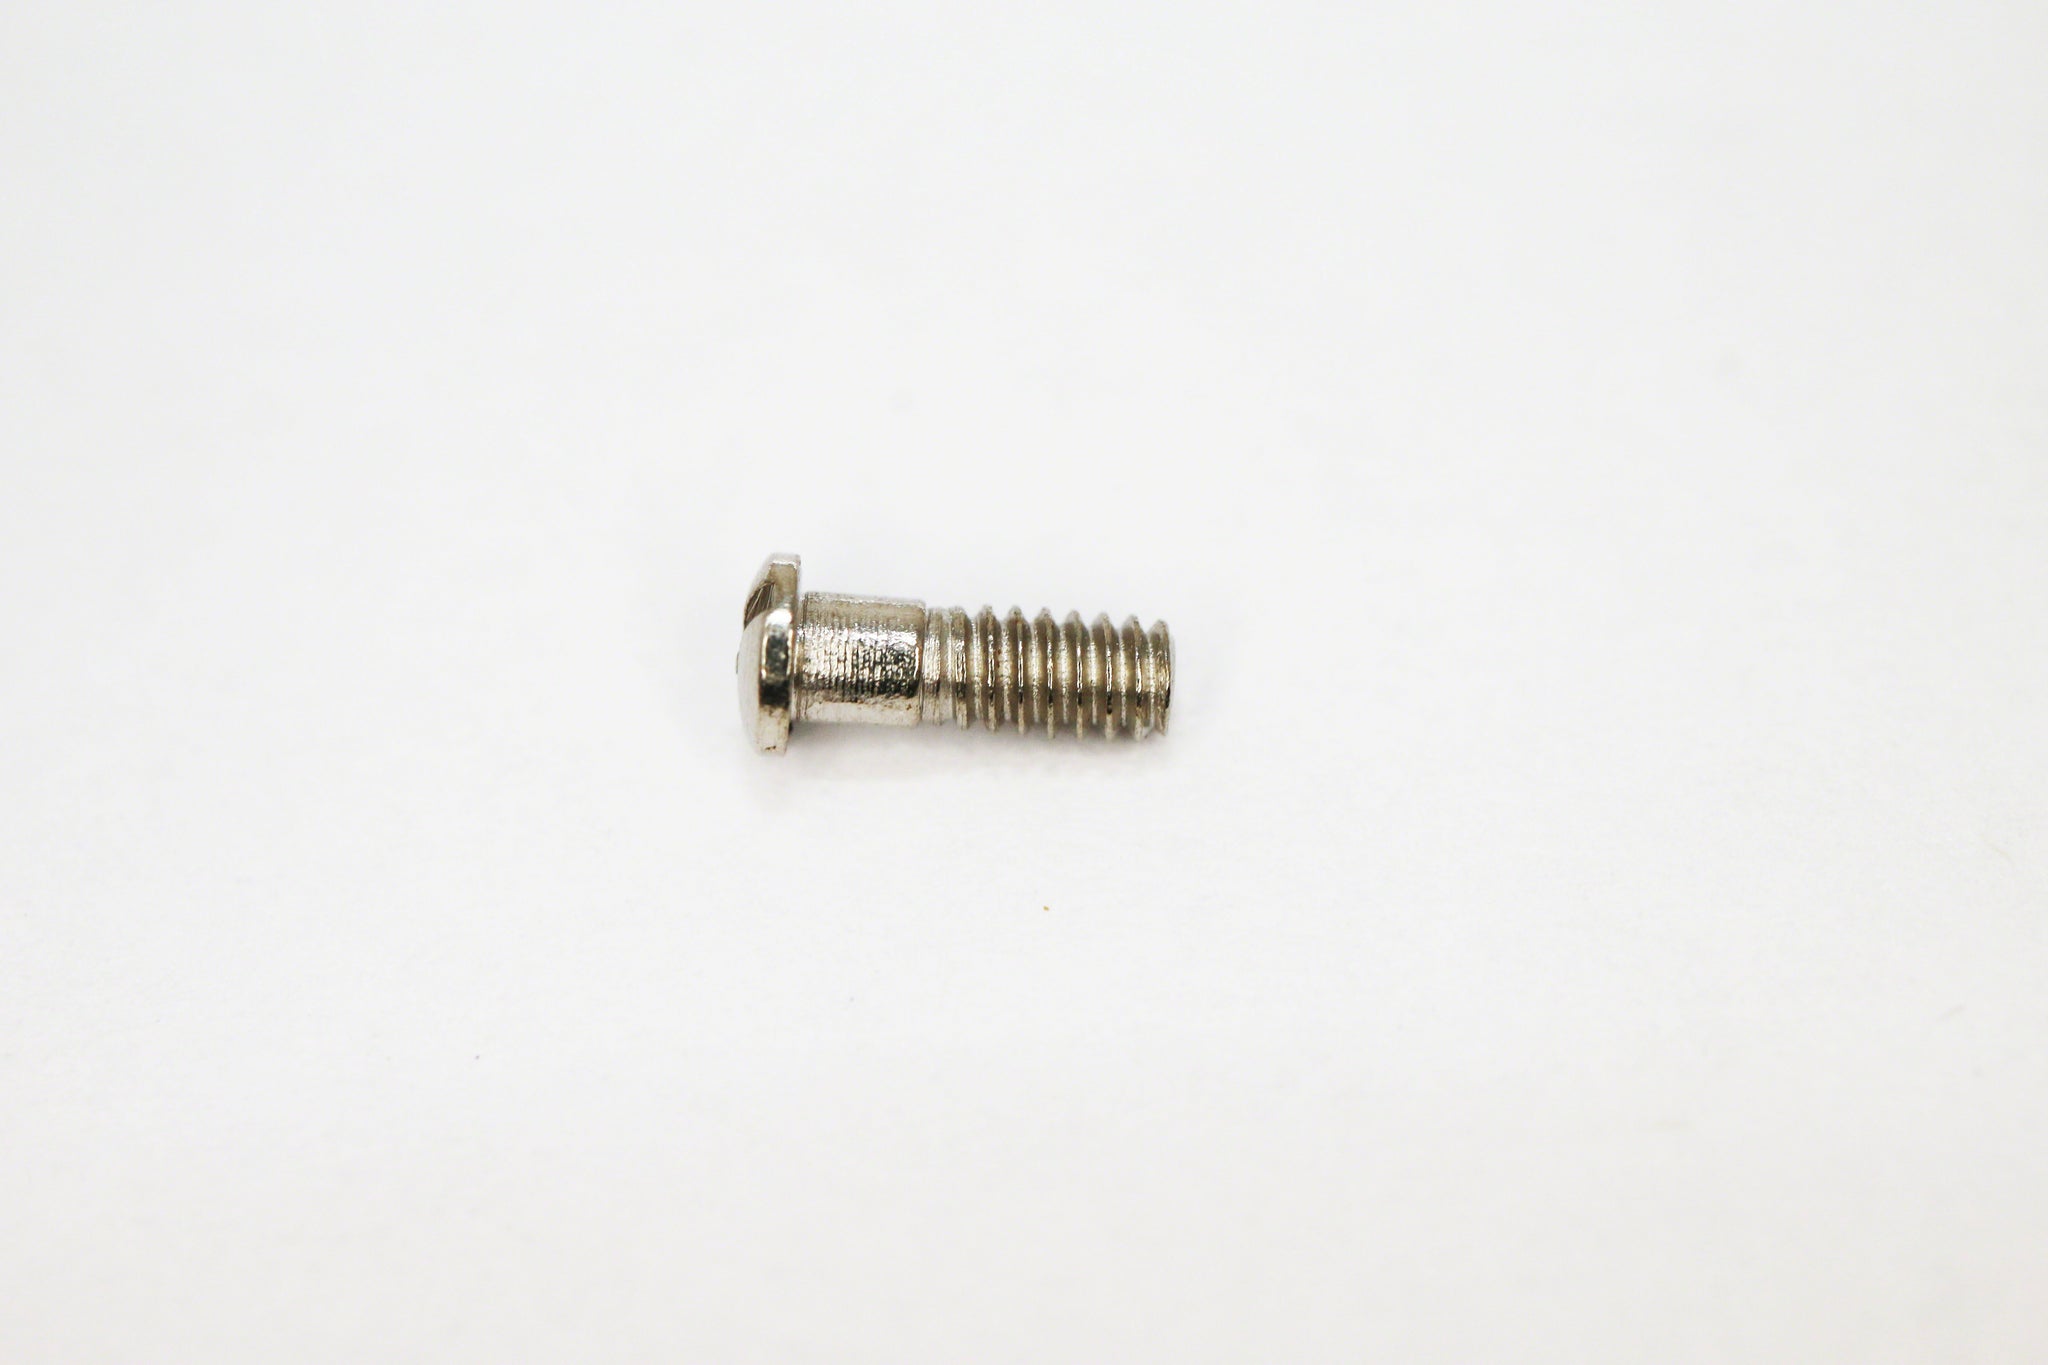 Tory Burch TY7095 Screws | Replacement Screws For TY 7095 